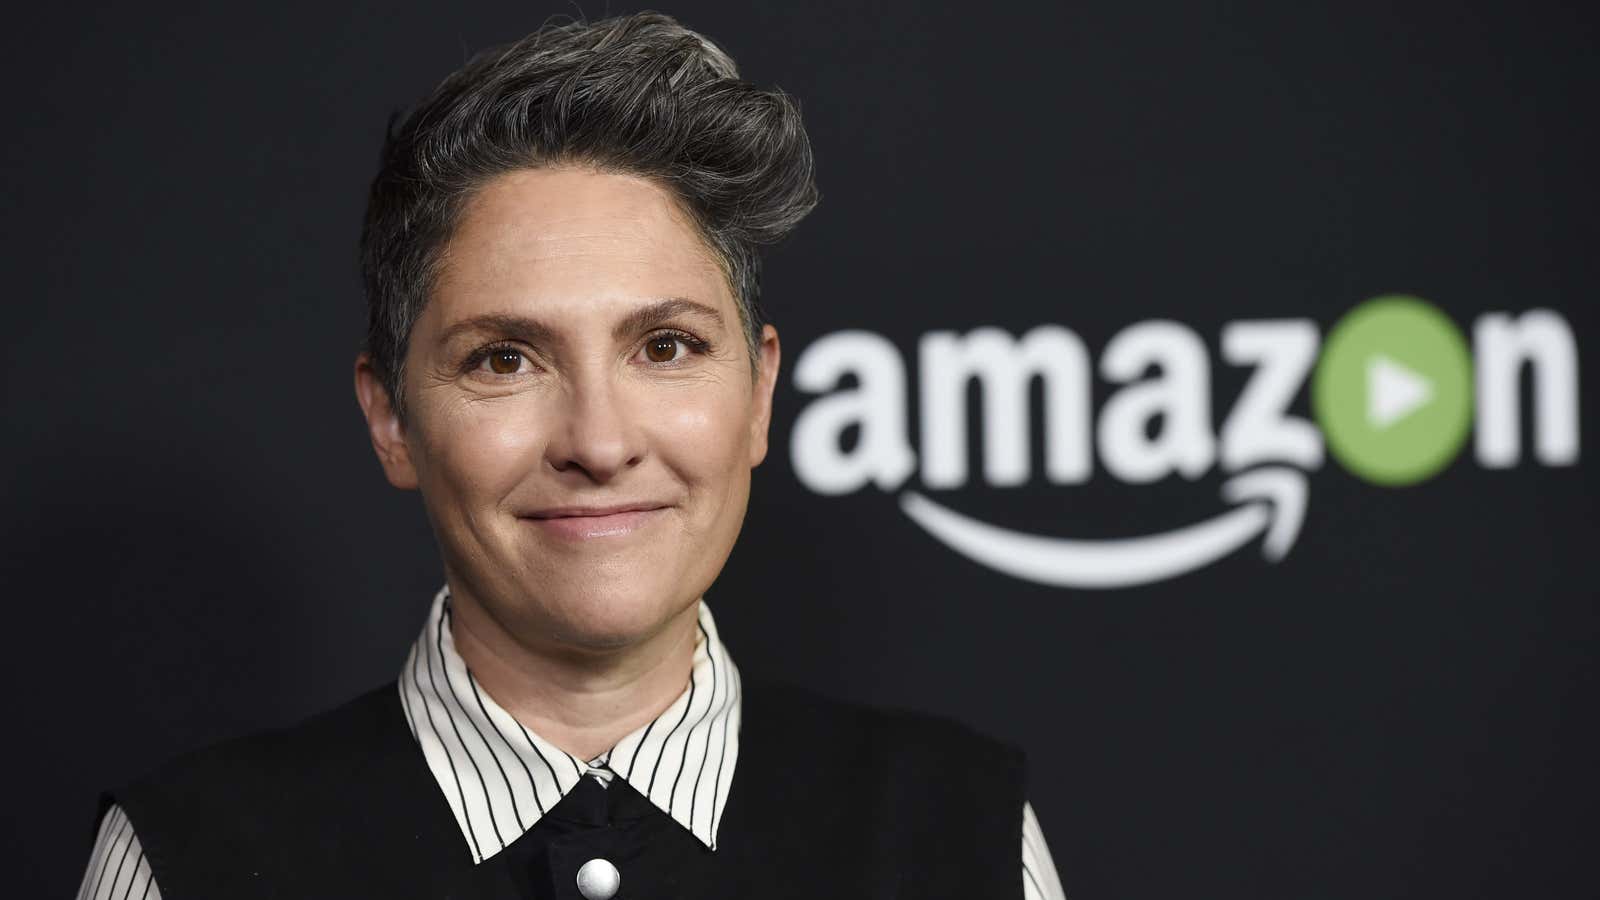 Experienced showrunners like Jill Soloway (“Transparent”) are in high demand in the era of peak TV.